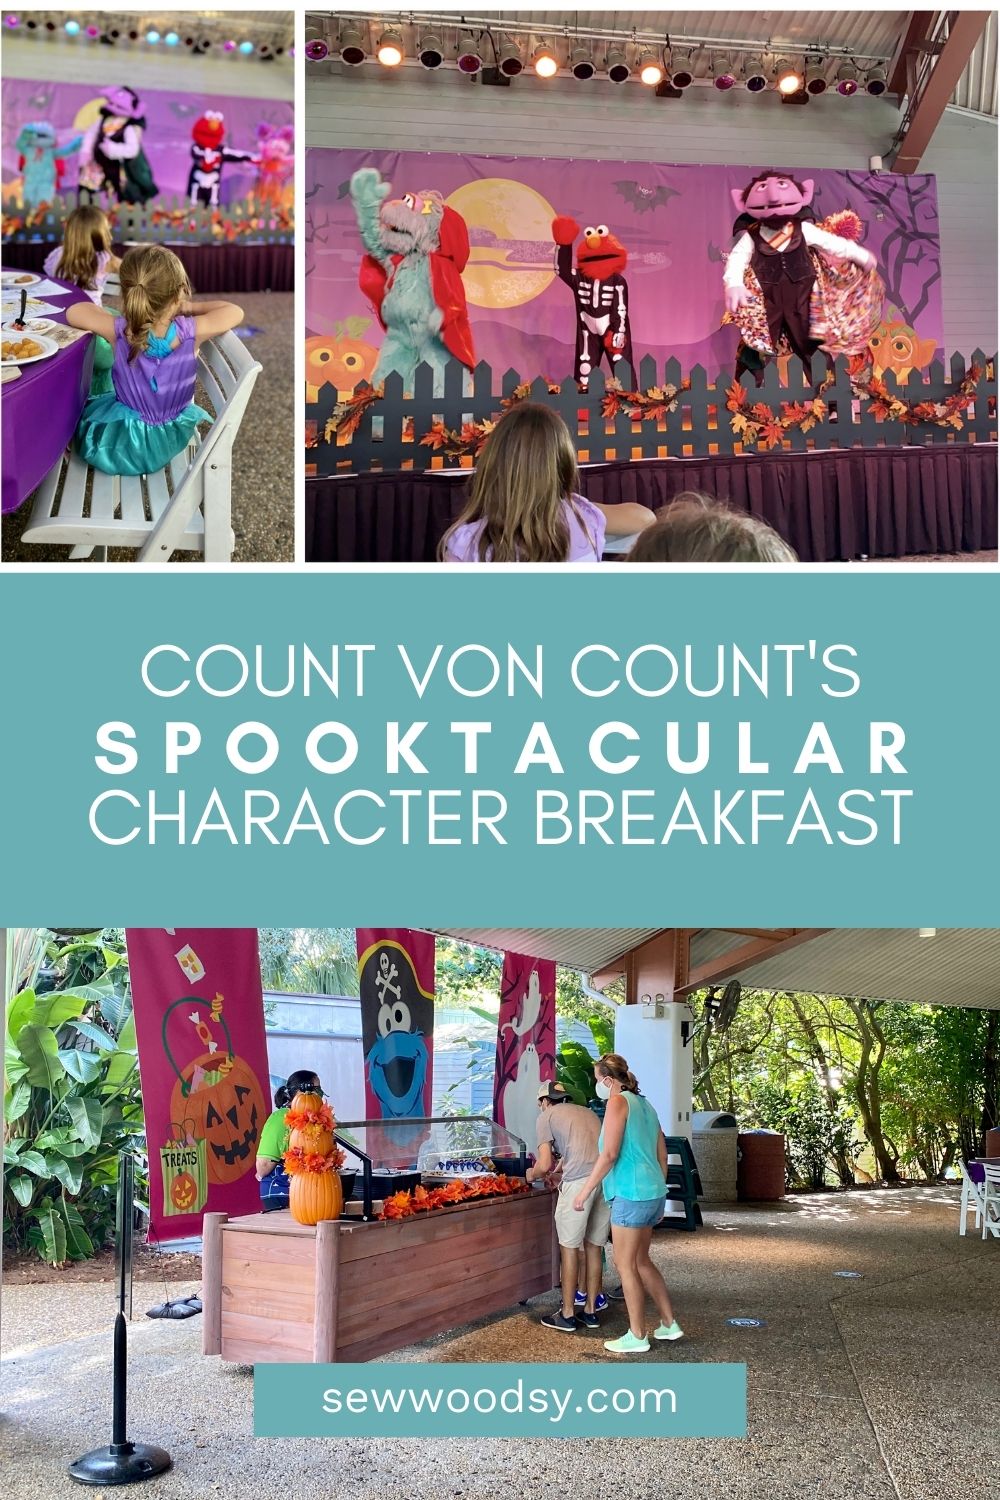 Three images from Count Von Count's character breakfast at SeaWorld.